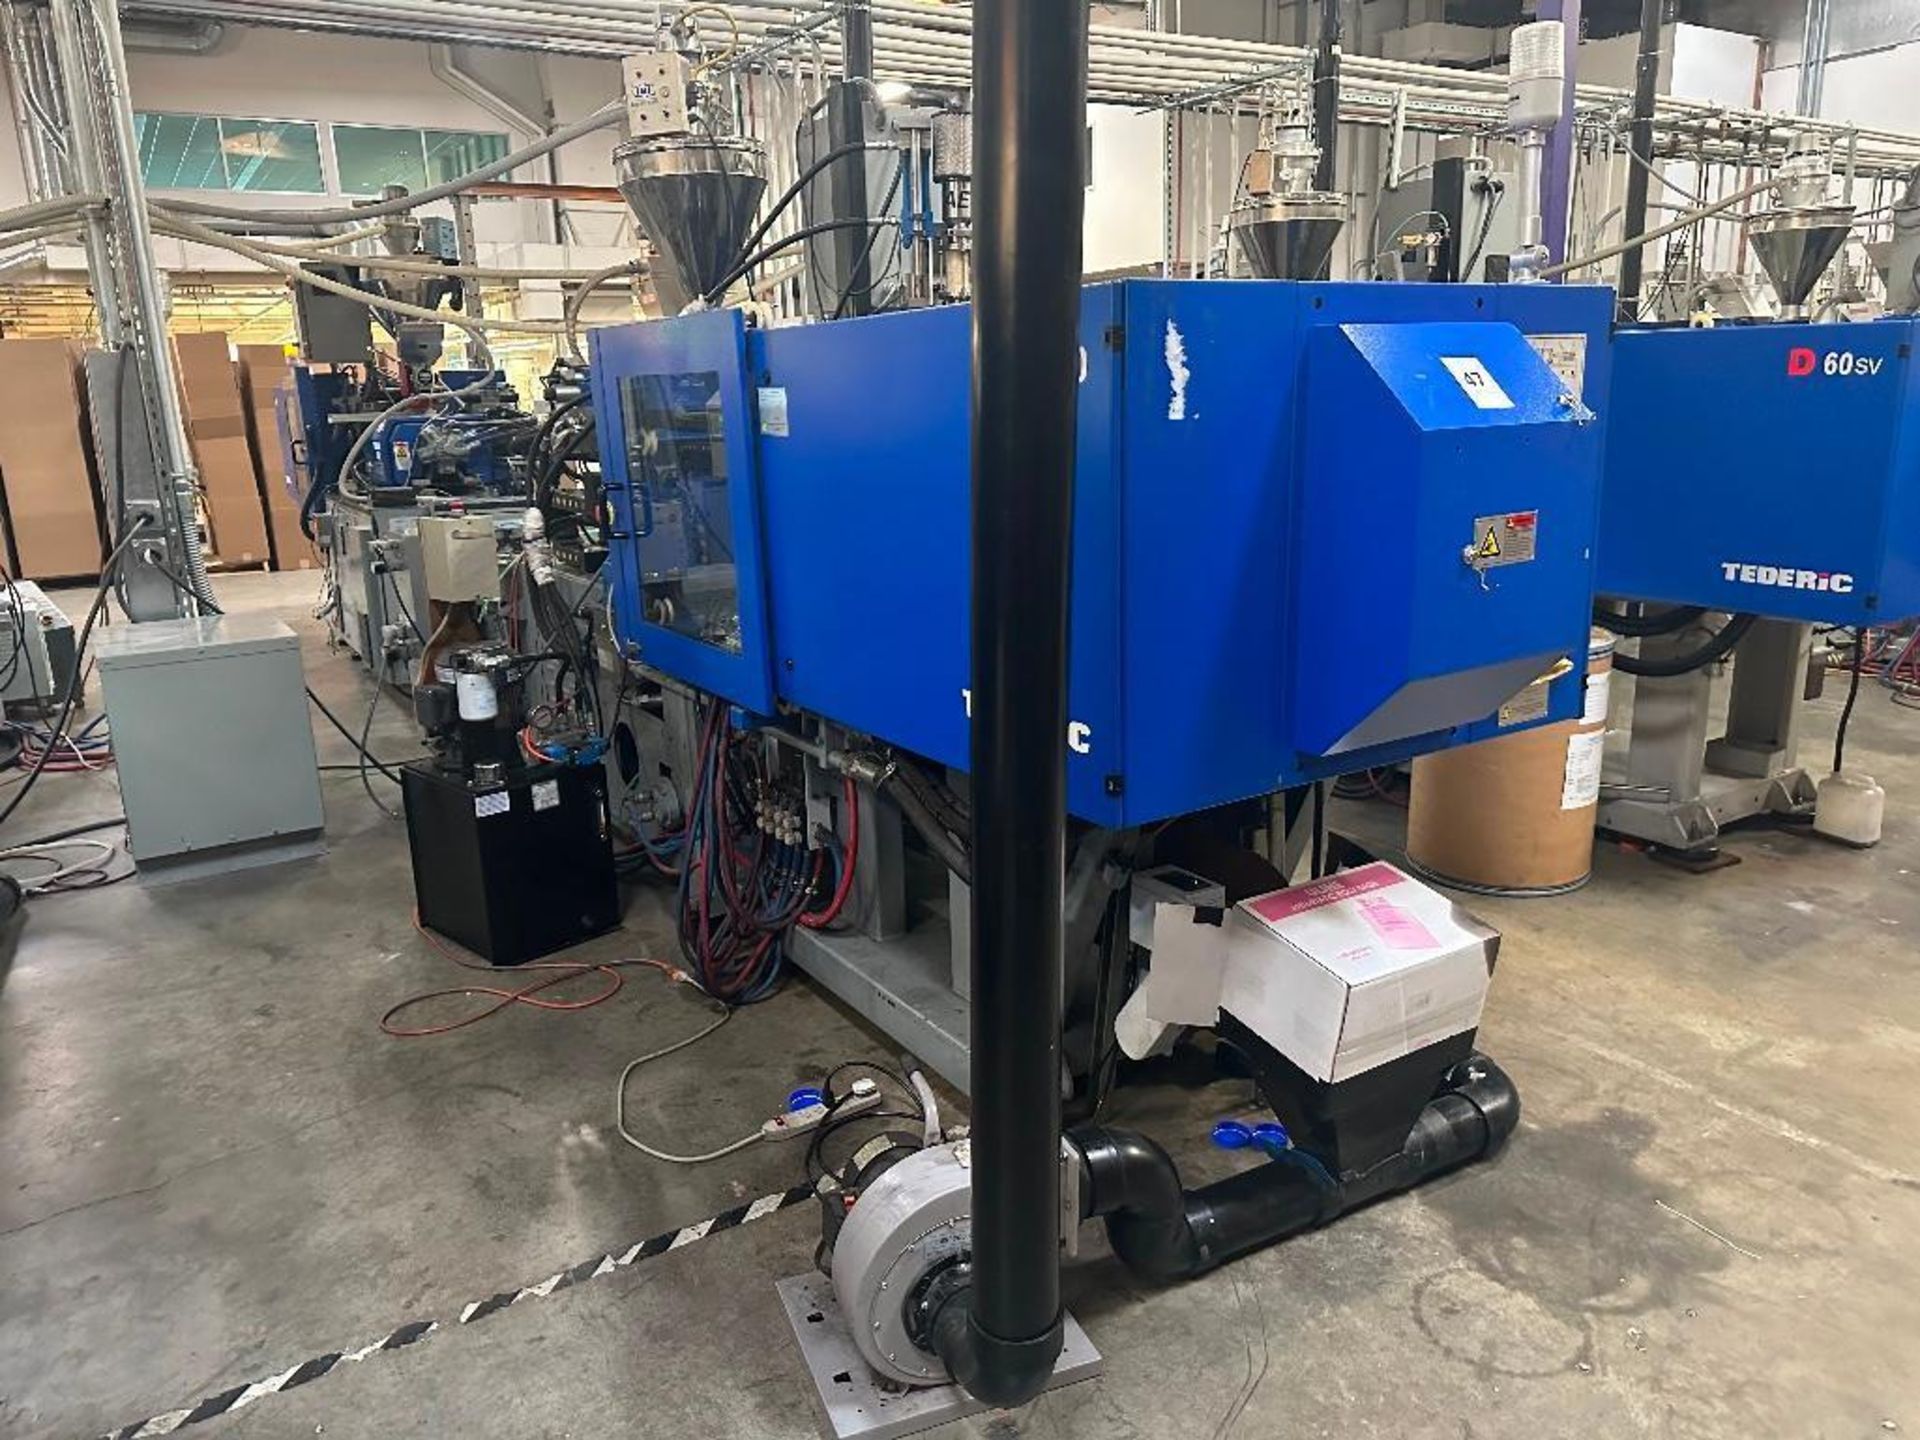 66 Ton Tederic D60 Plastic Injection Molder, Keba 12000 Control, s/n T3008-0200, New 2018 - Image 7 of 17